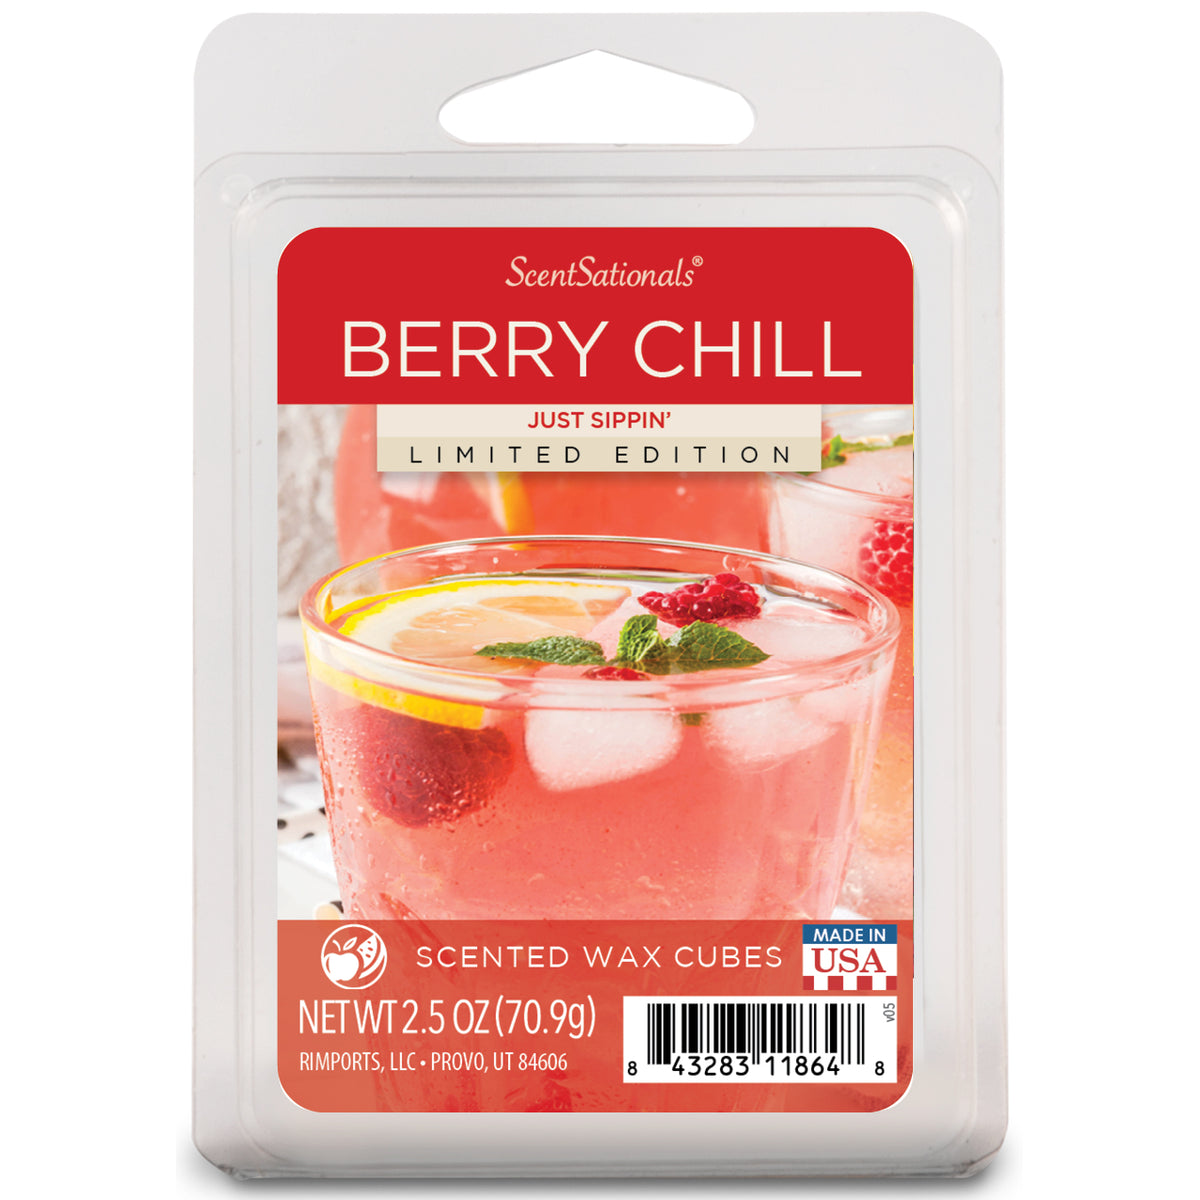 Strawberry Crunch Scented Wax Melts, ScentSationals, 2.5 oz (1-Pack) 